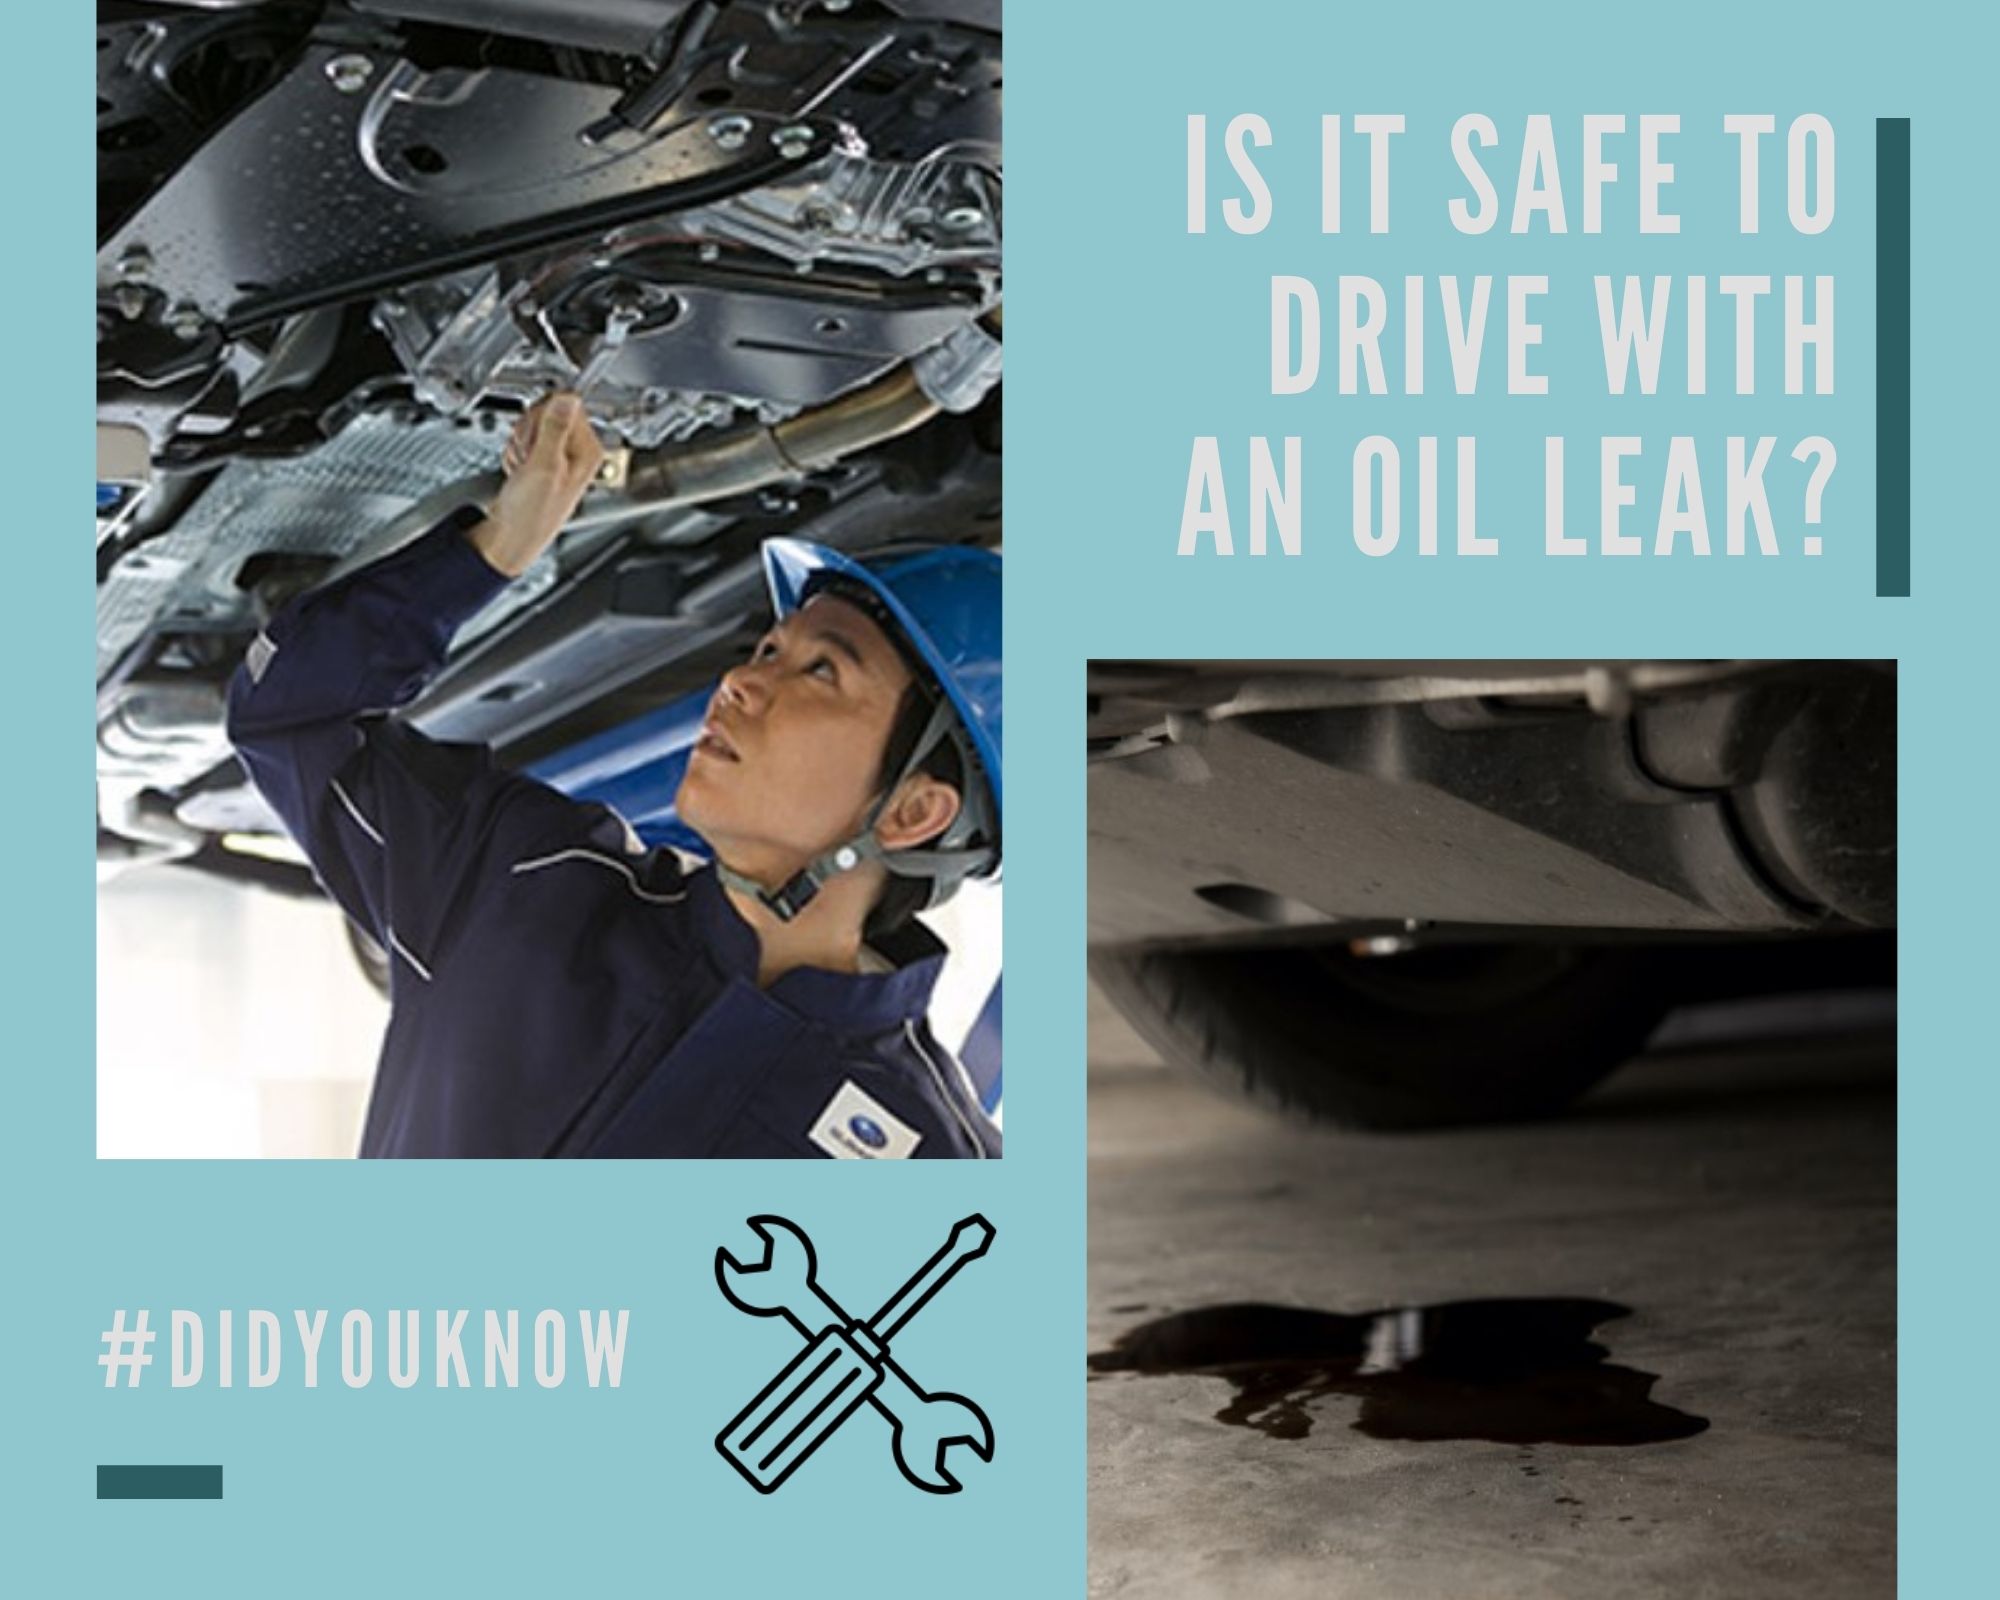 Is it safe to drive with an oil leak?